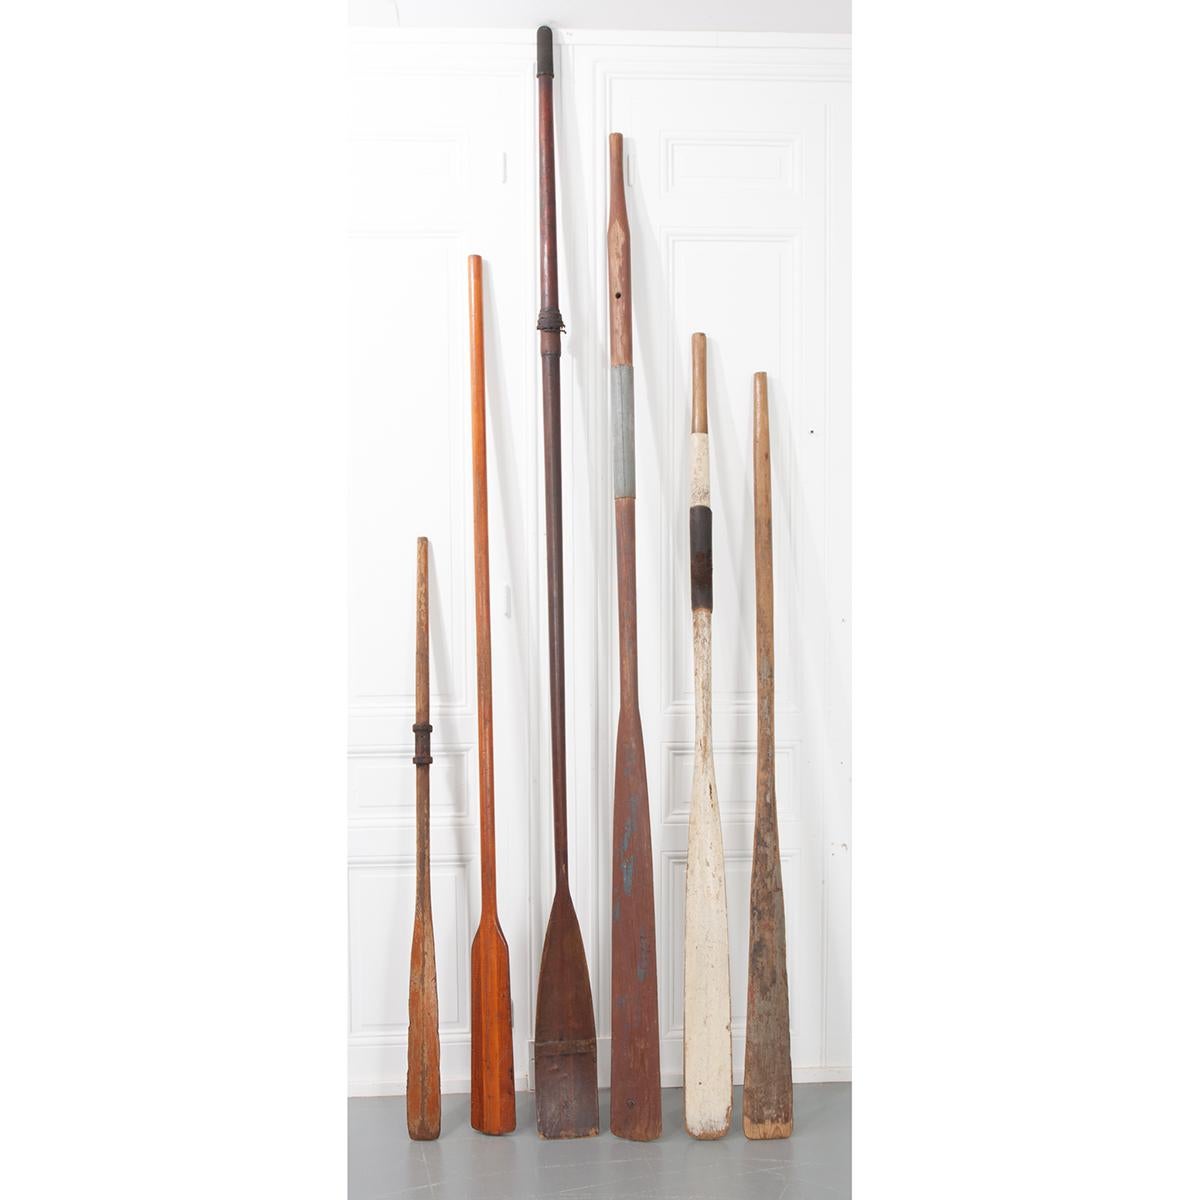 French Collection of 10 Vintage Oars